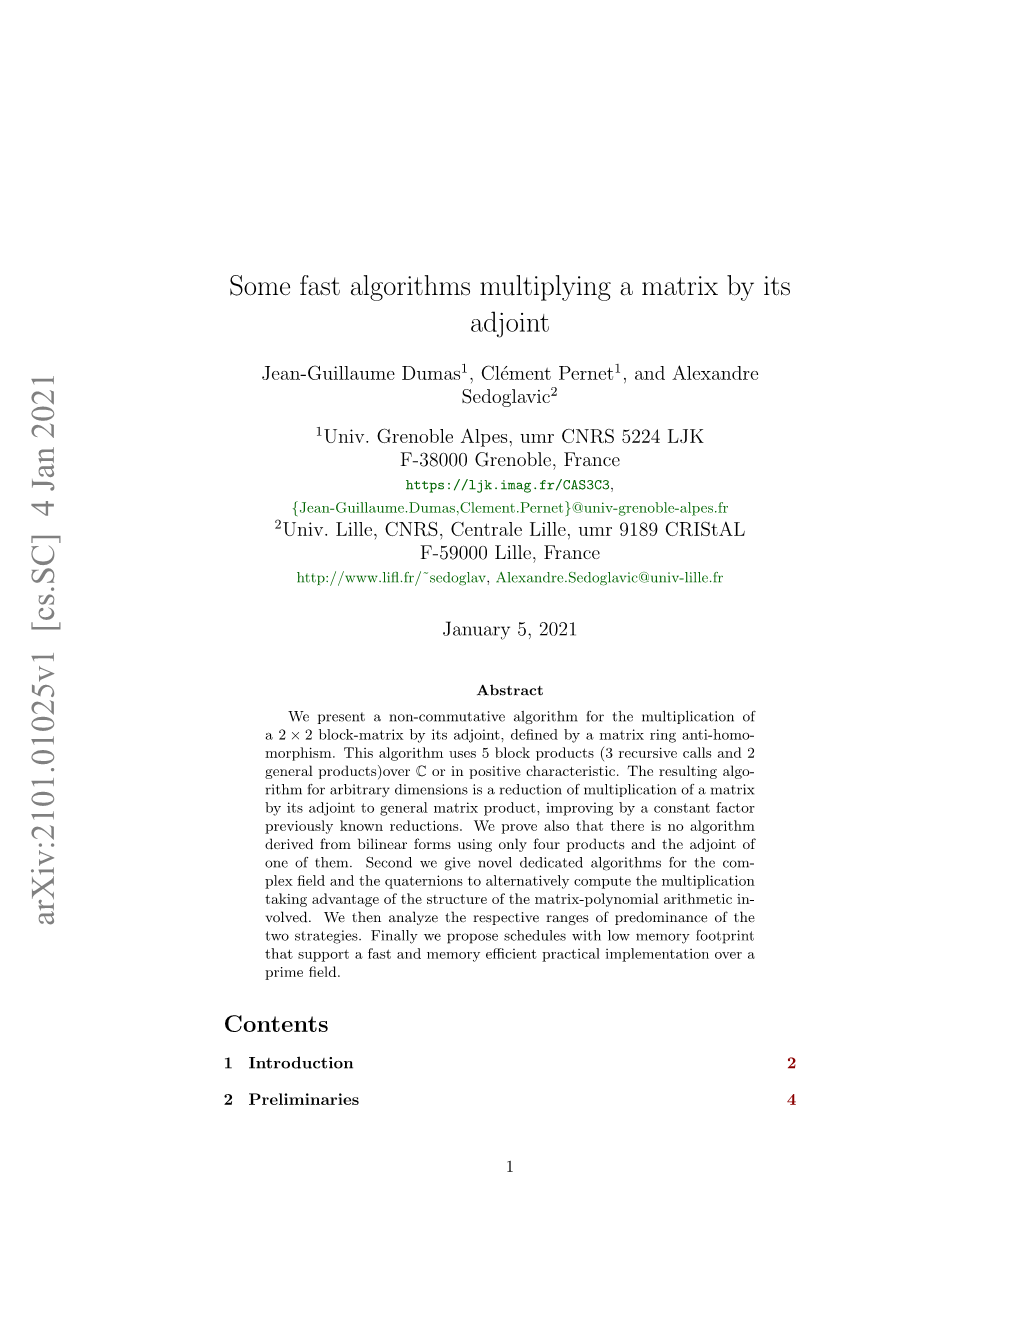 Some Fast Algorithms Multiplying a Matrix by Its Adjoint